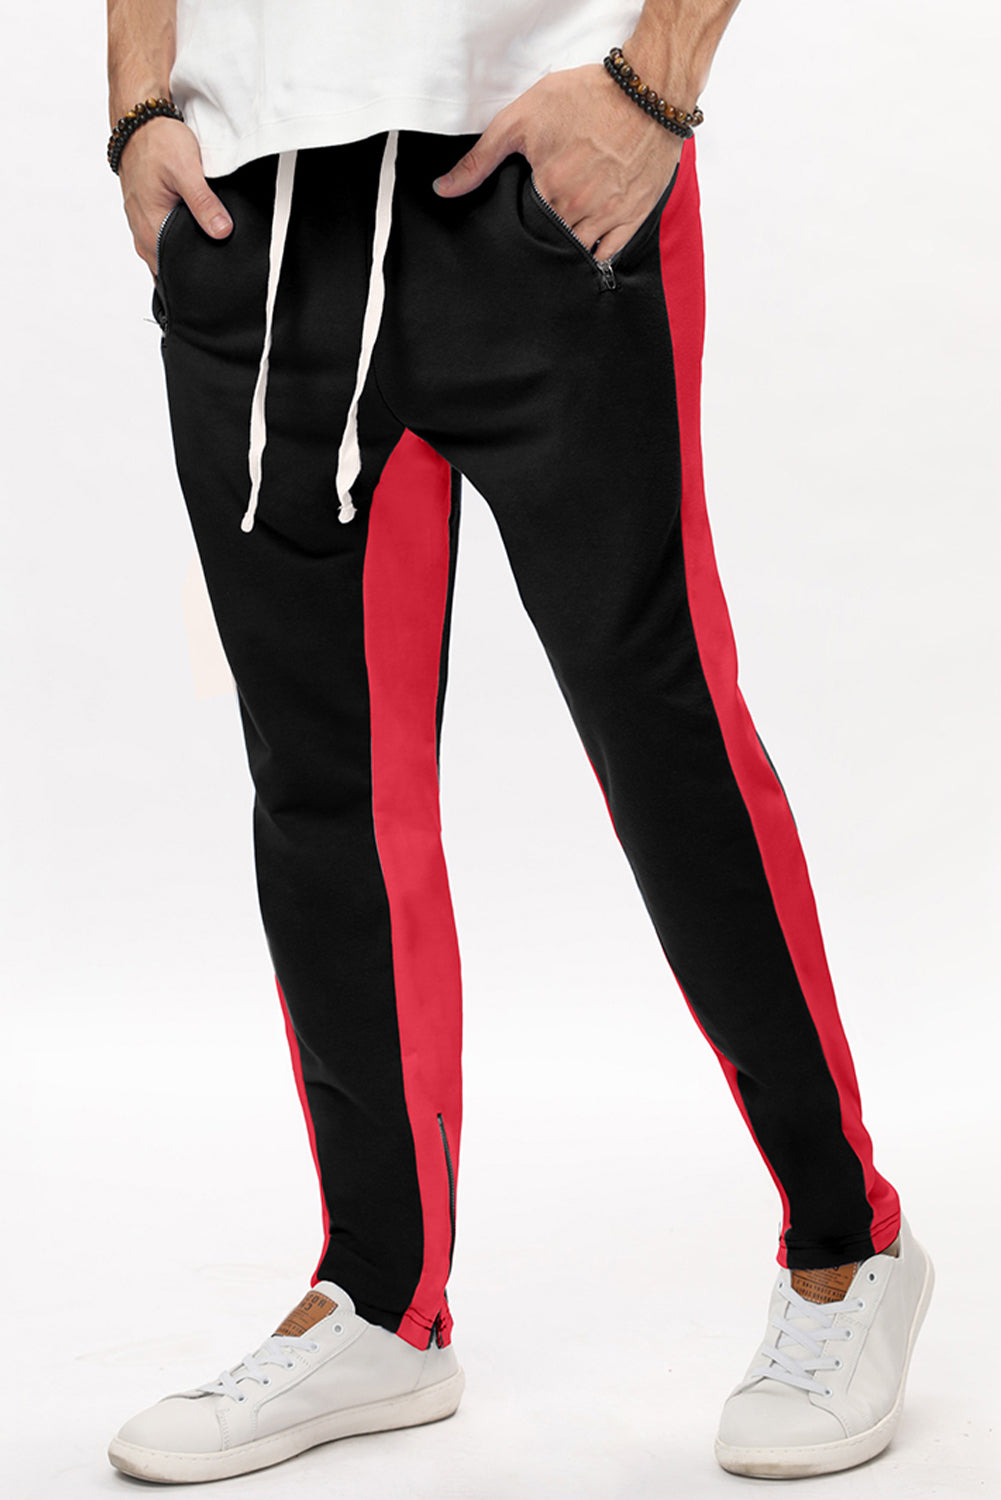 Red Colorblock Patchwork Zipper Casual Mens Joggers Red 95%Polyester+5%Spandex Men's Pants JT's Designer Fashion